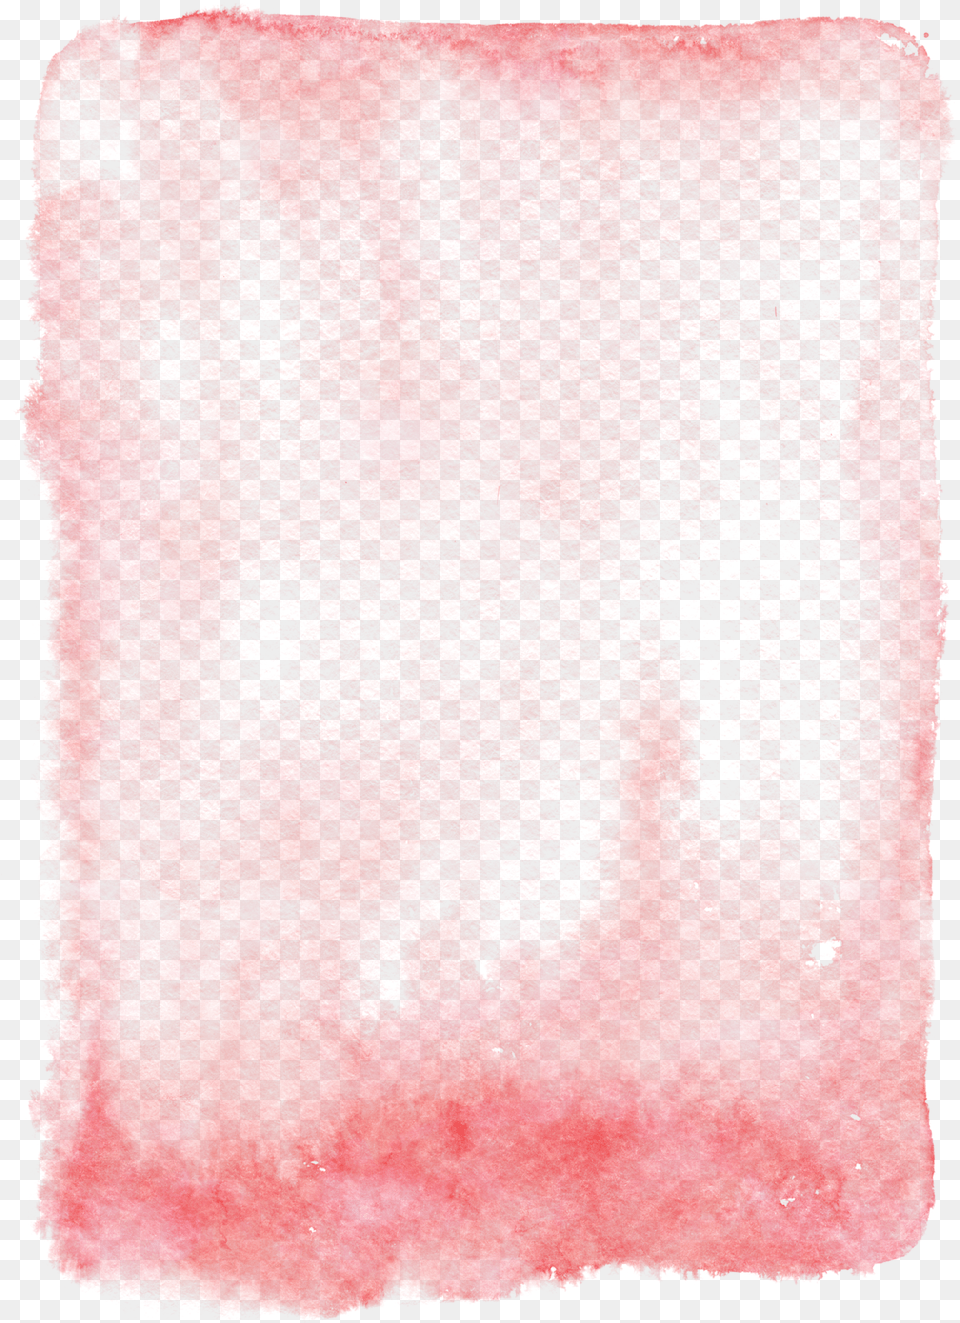 Download Pink Red Watercolor Brush Stroke Freebie Watercolor Gold Paint Brush Stroke No Background, Computer Hardware, Electronics, Hardware, Body Part Free Png